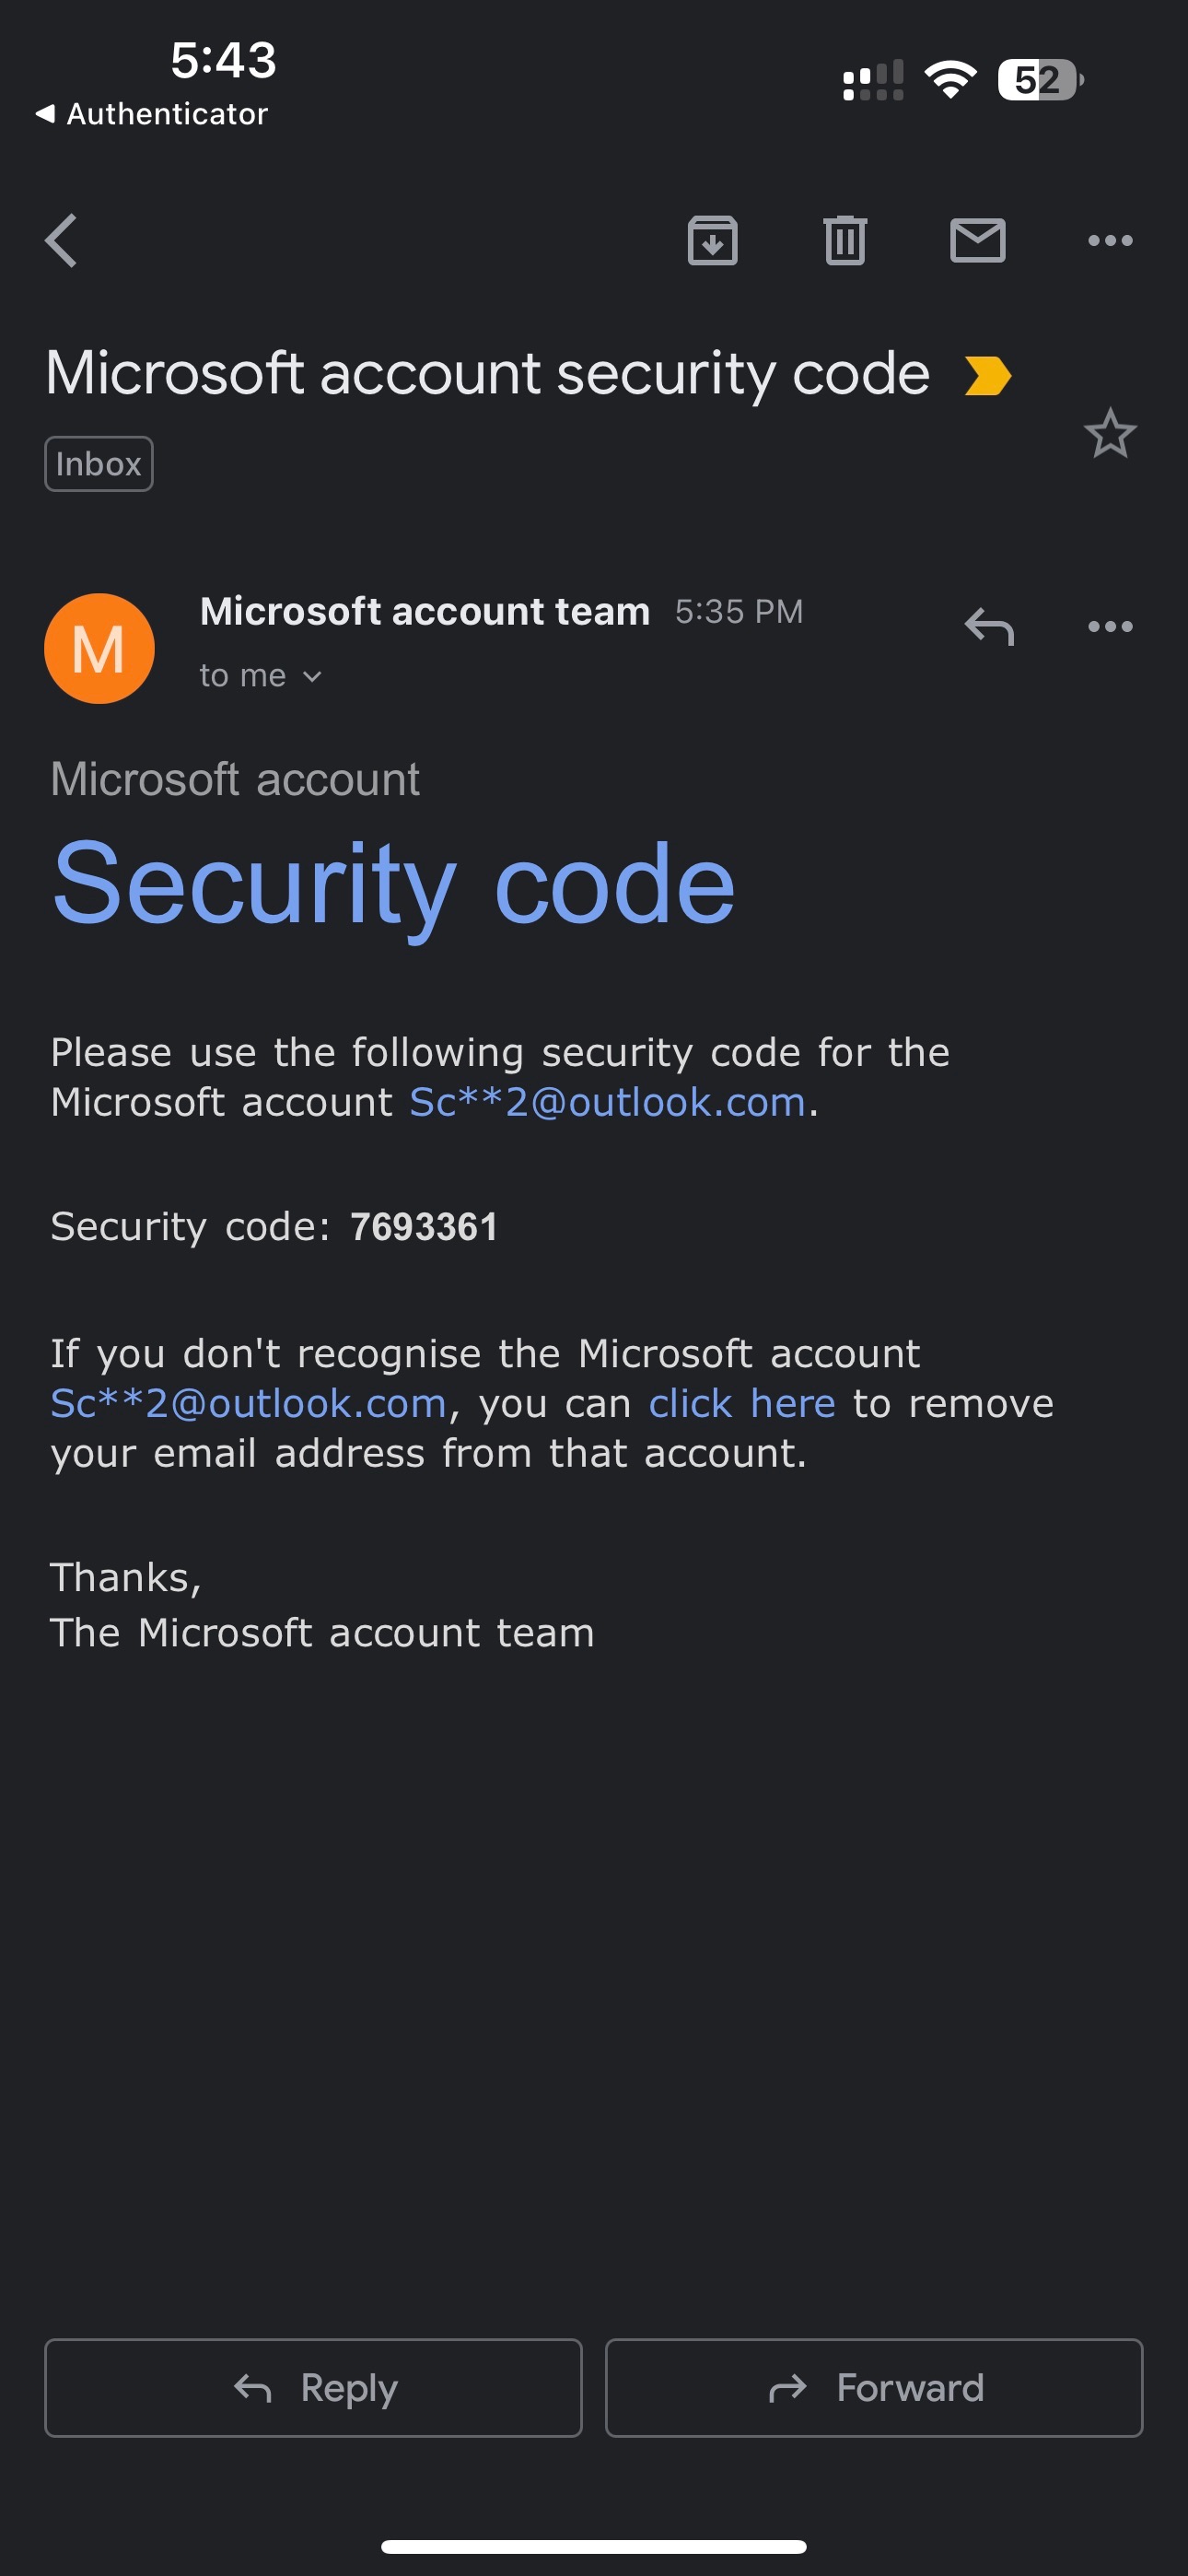 Microsoft Email Scam - Removal and recovery steps (updated)